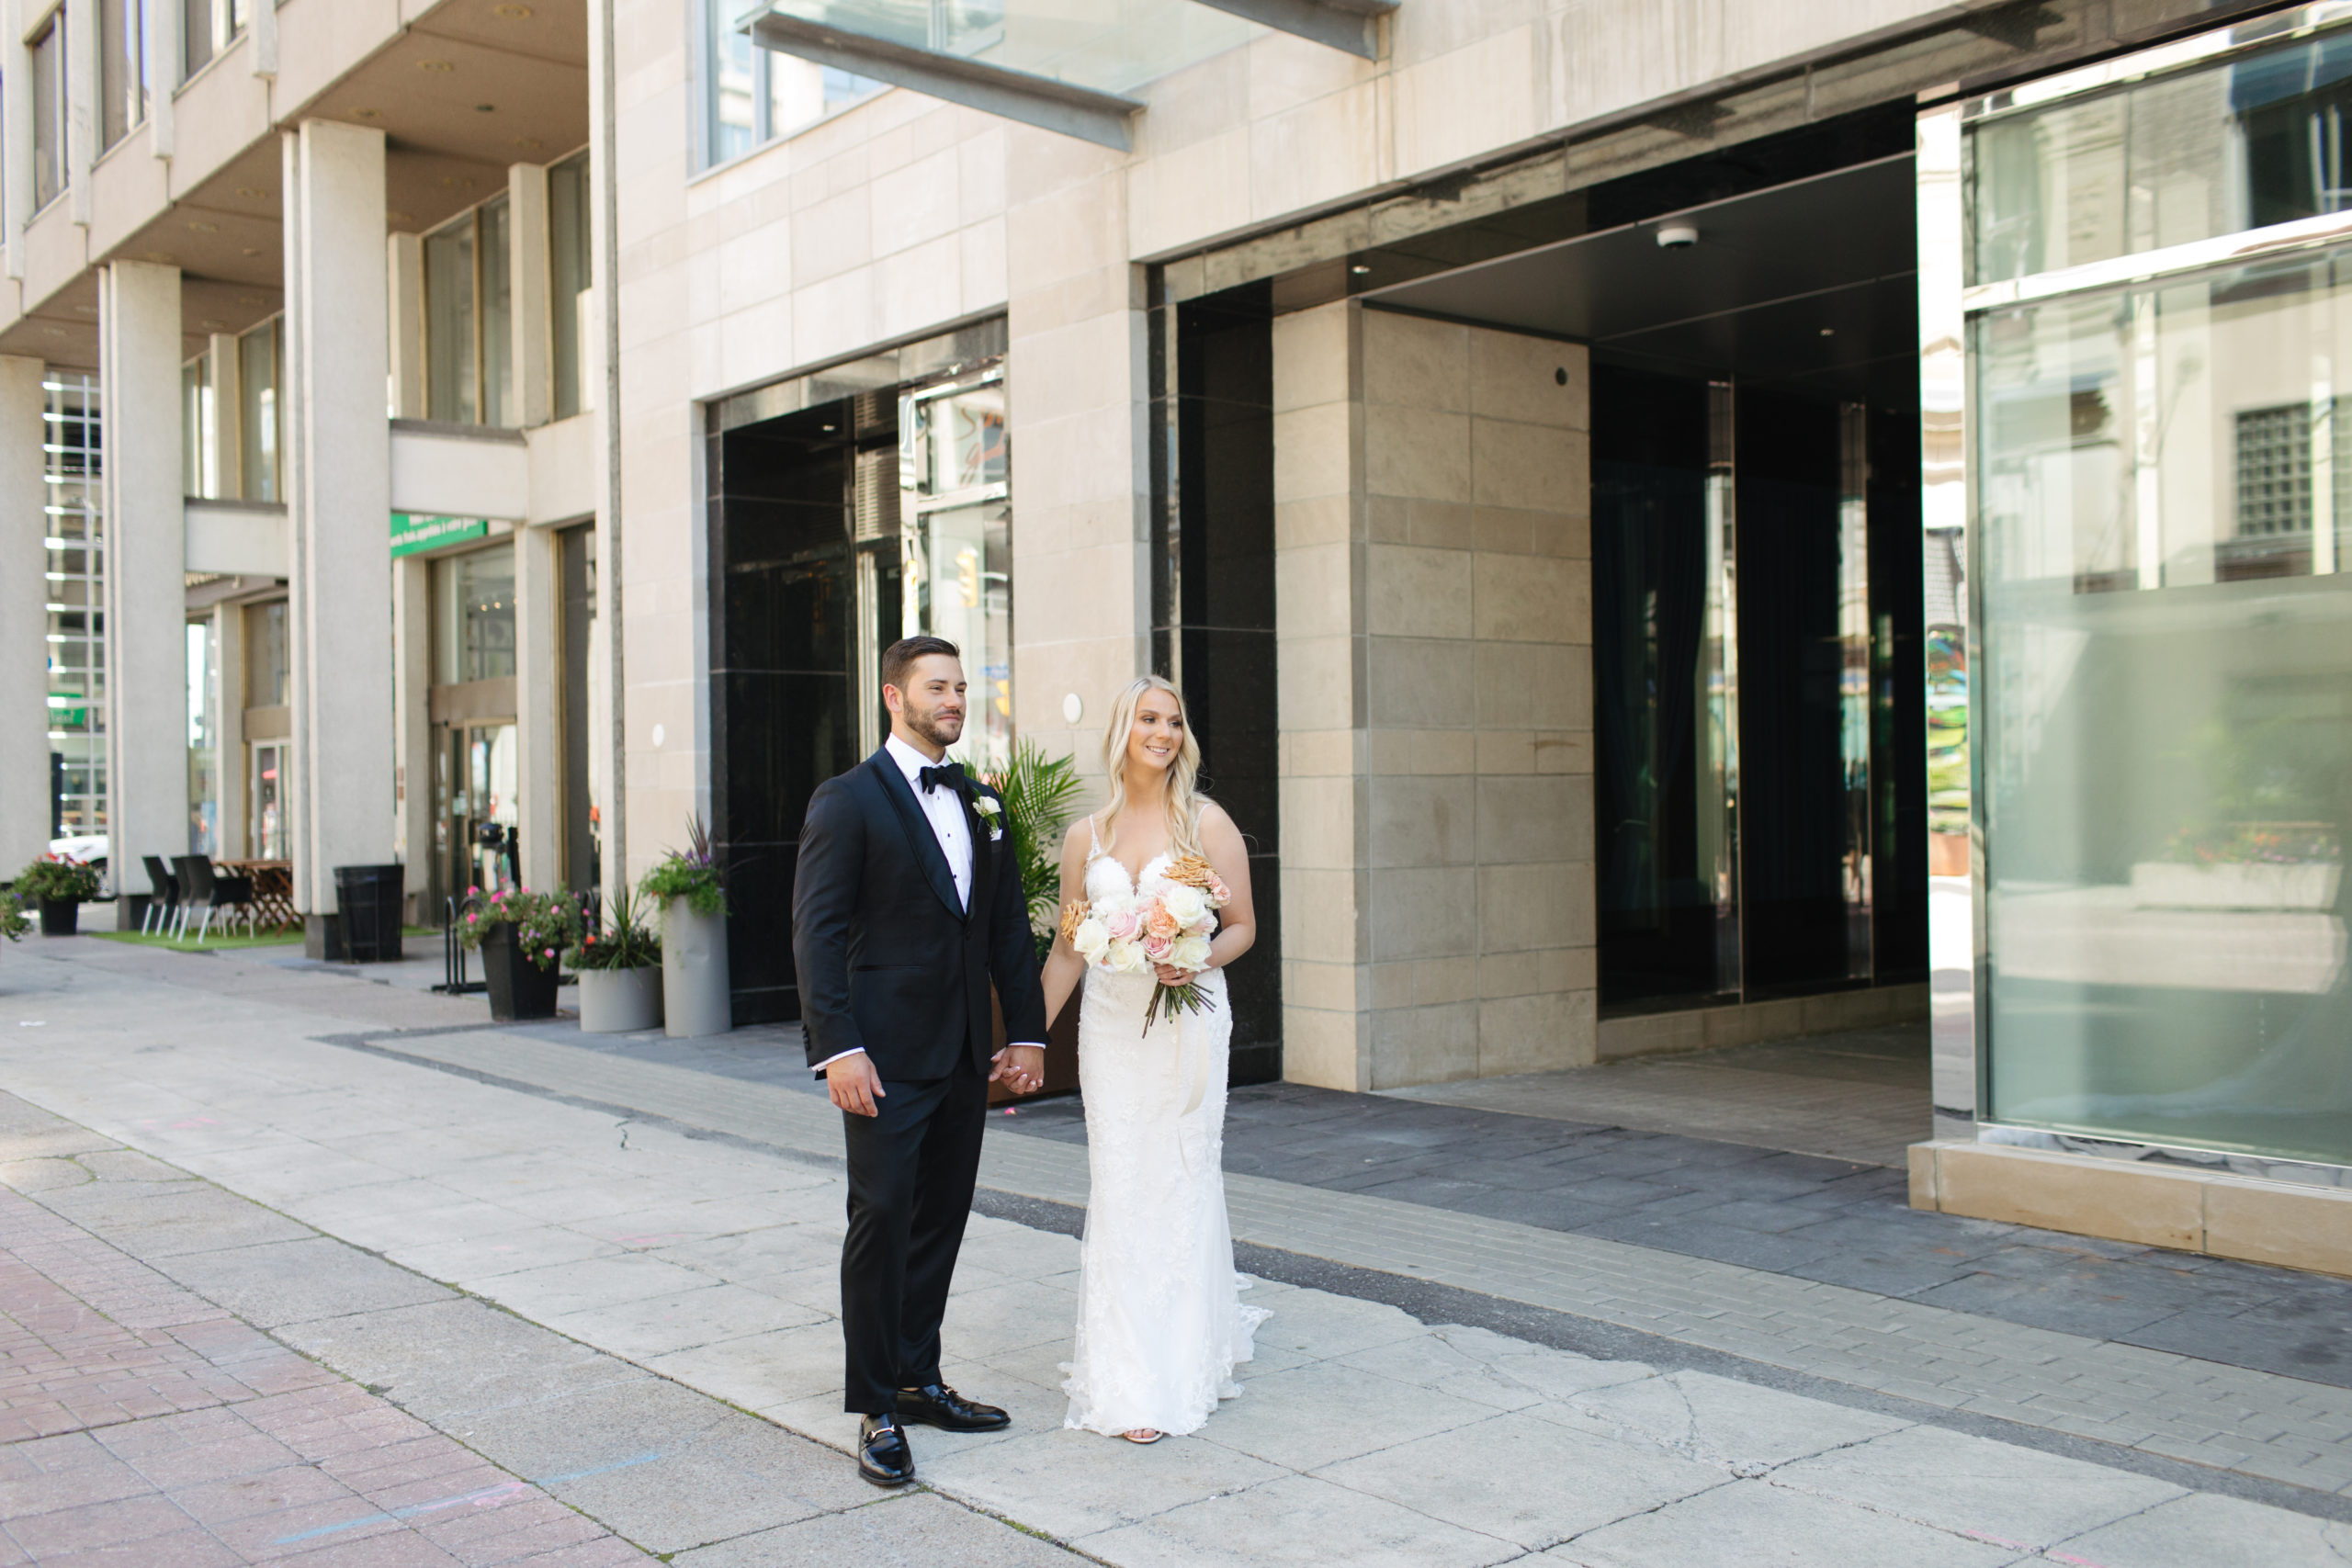 Ottawa Lago Wedding Couple dress in wedding attire standing in front of a building